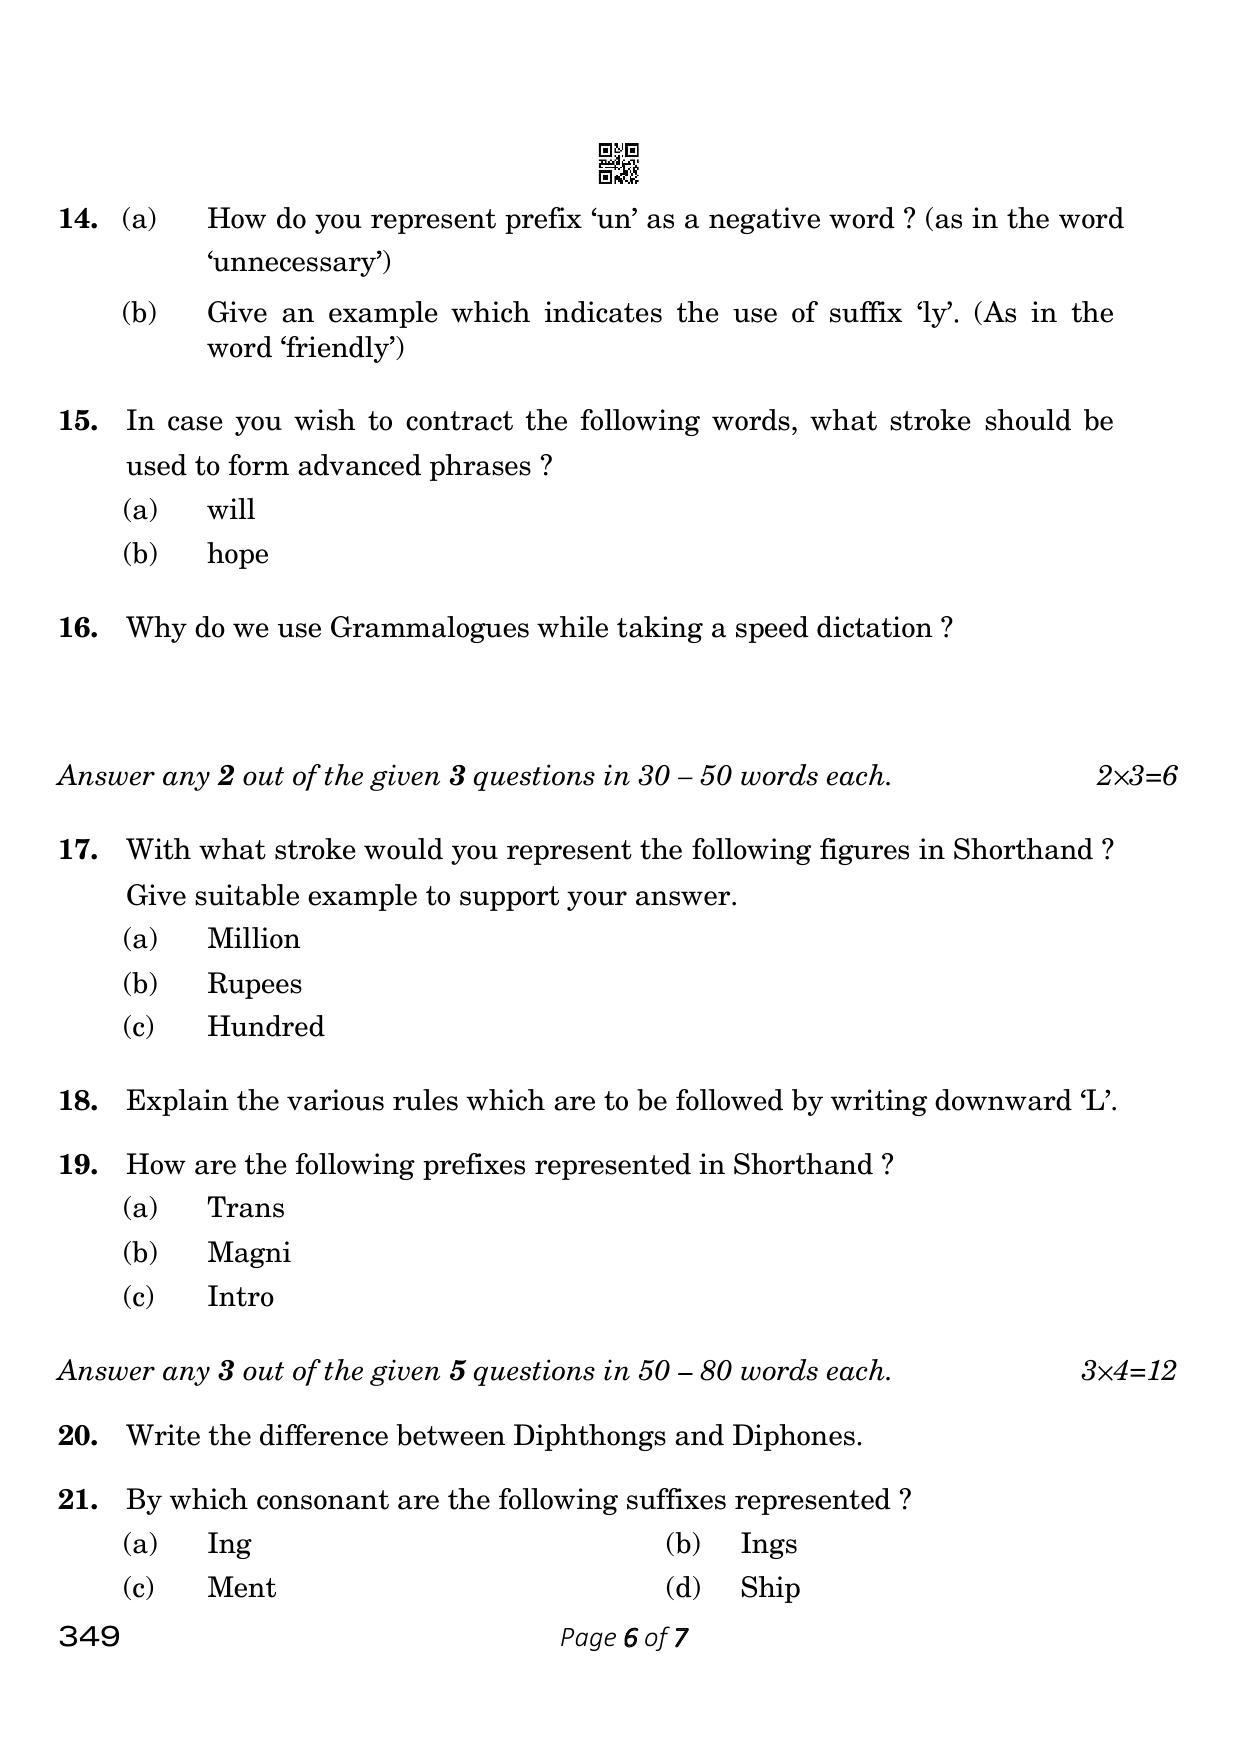 CBSE Class 12 349_Shorthand English 2023 Question Paper - Page 6